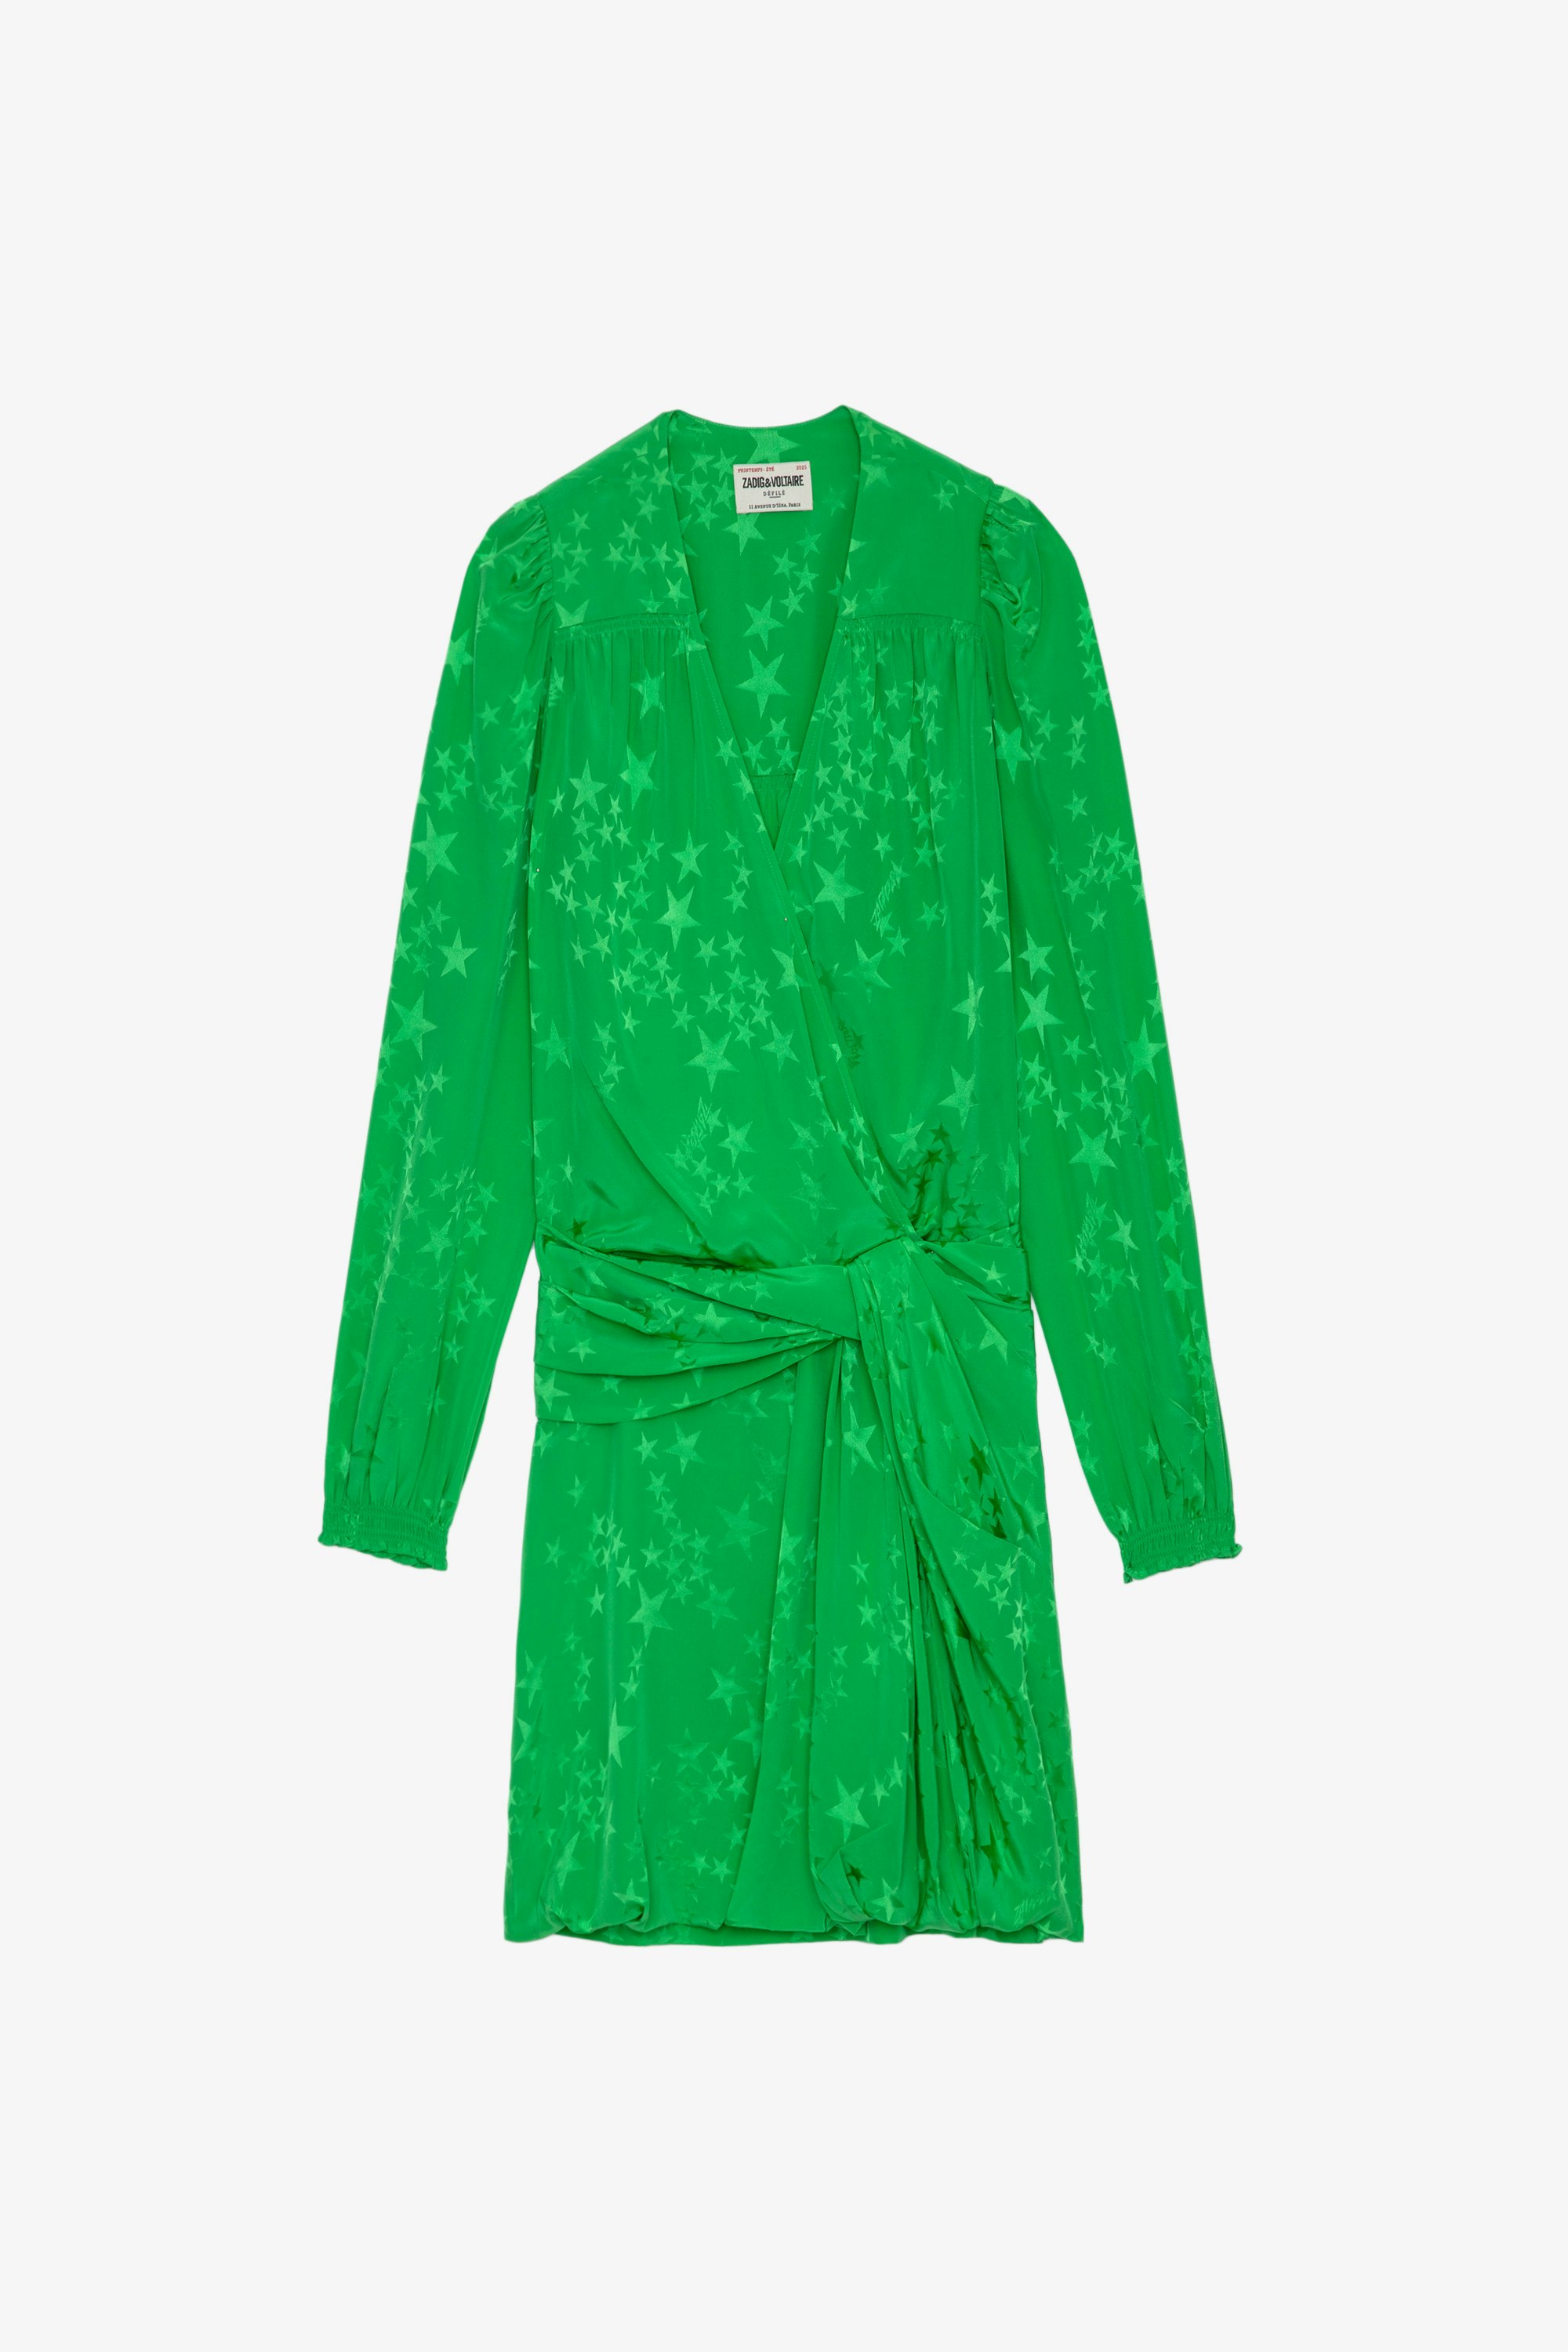 Recol Jac Silk Dress Women’s apple green silk jacquard mini dress with draped effect, embellished with stars and tied at the waist